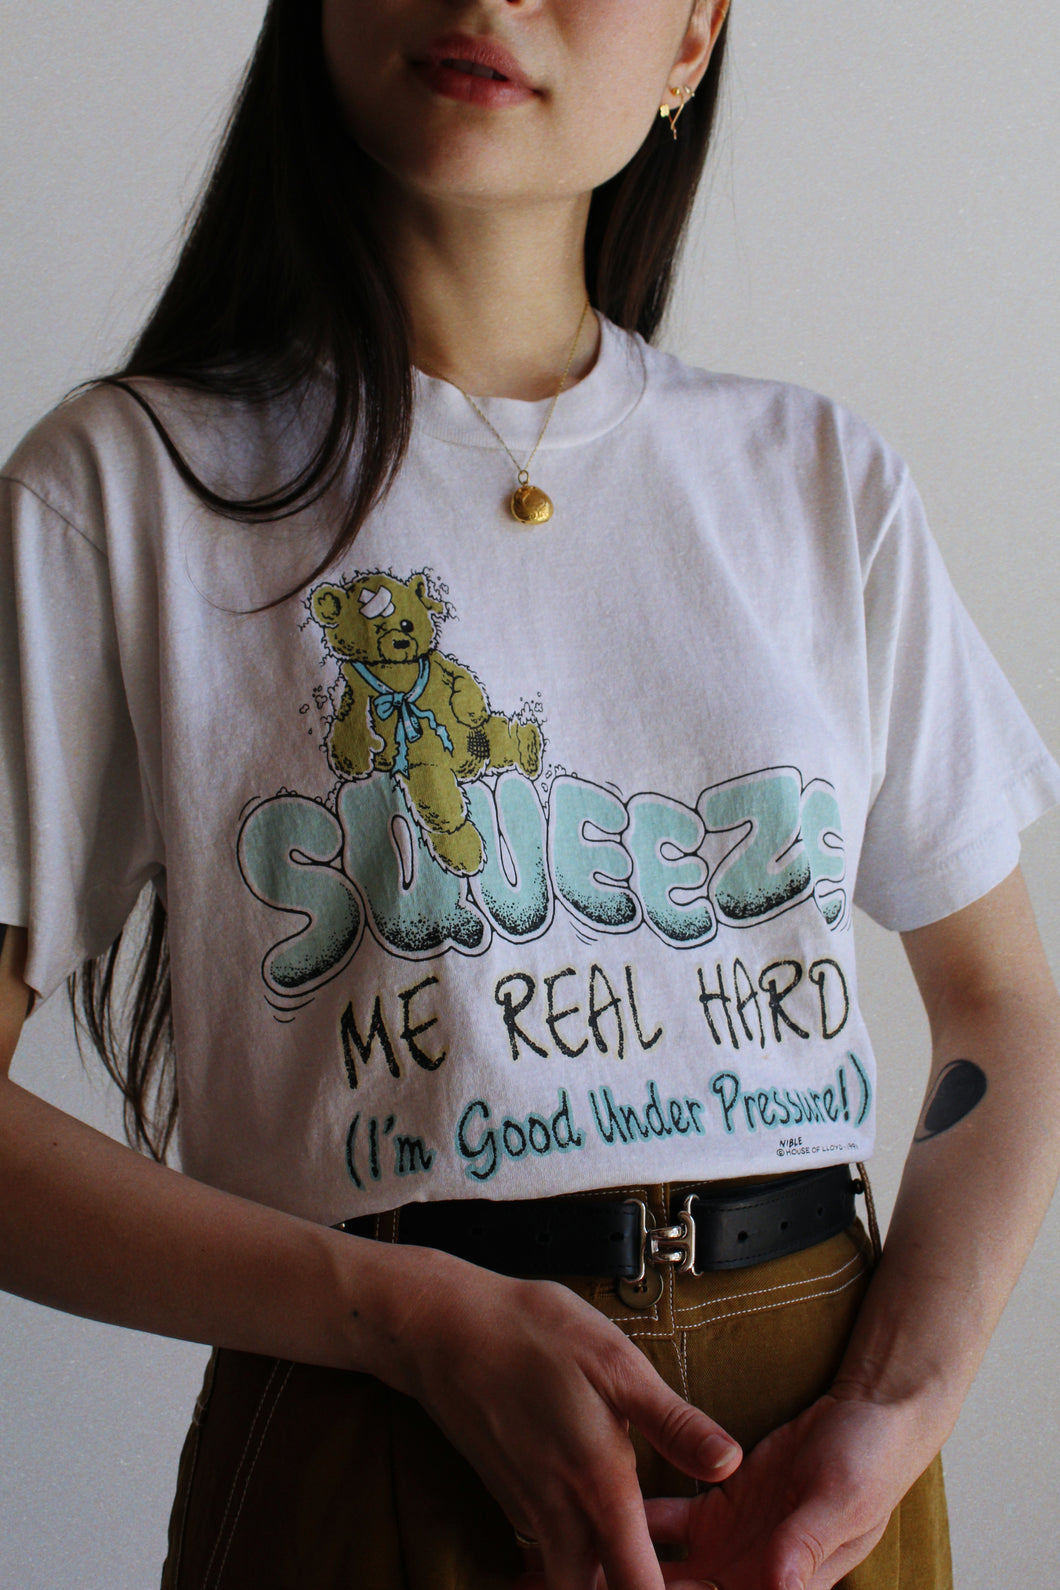 Squeeze Me Real Hard Tee